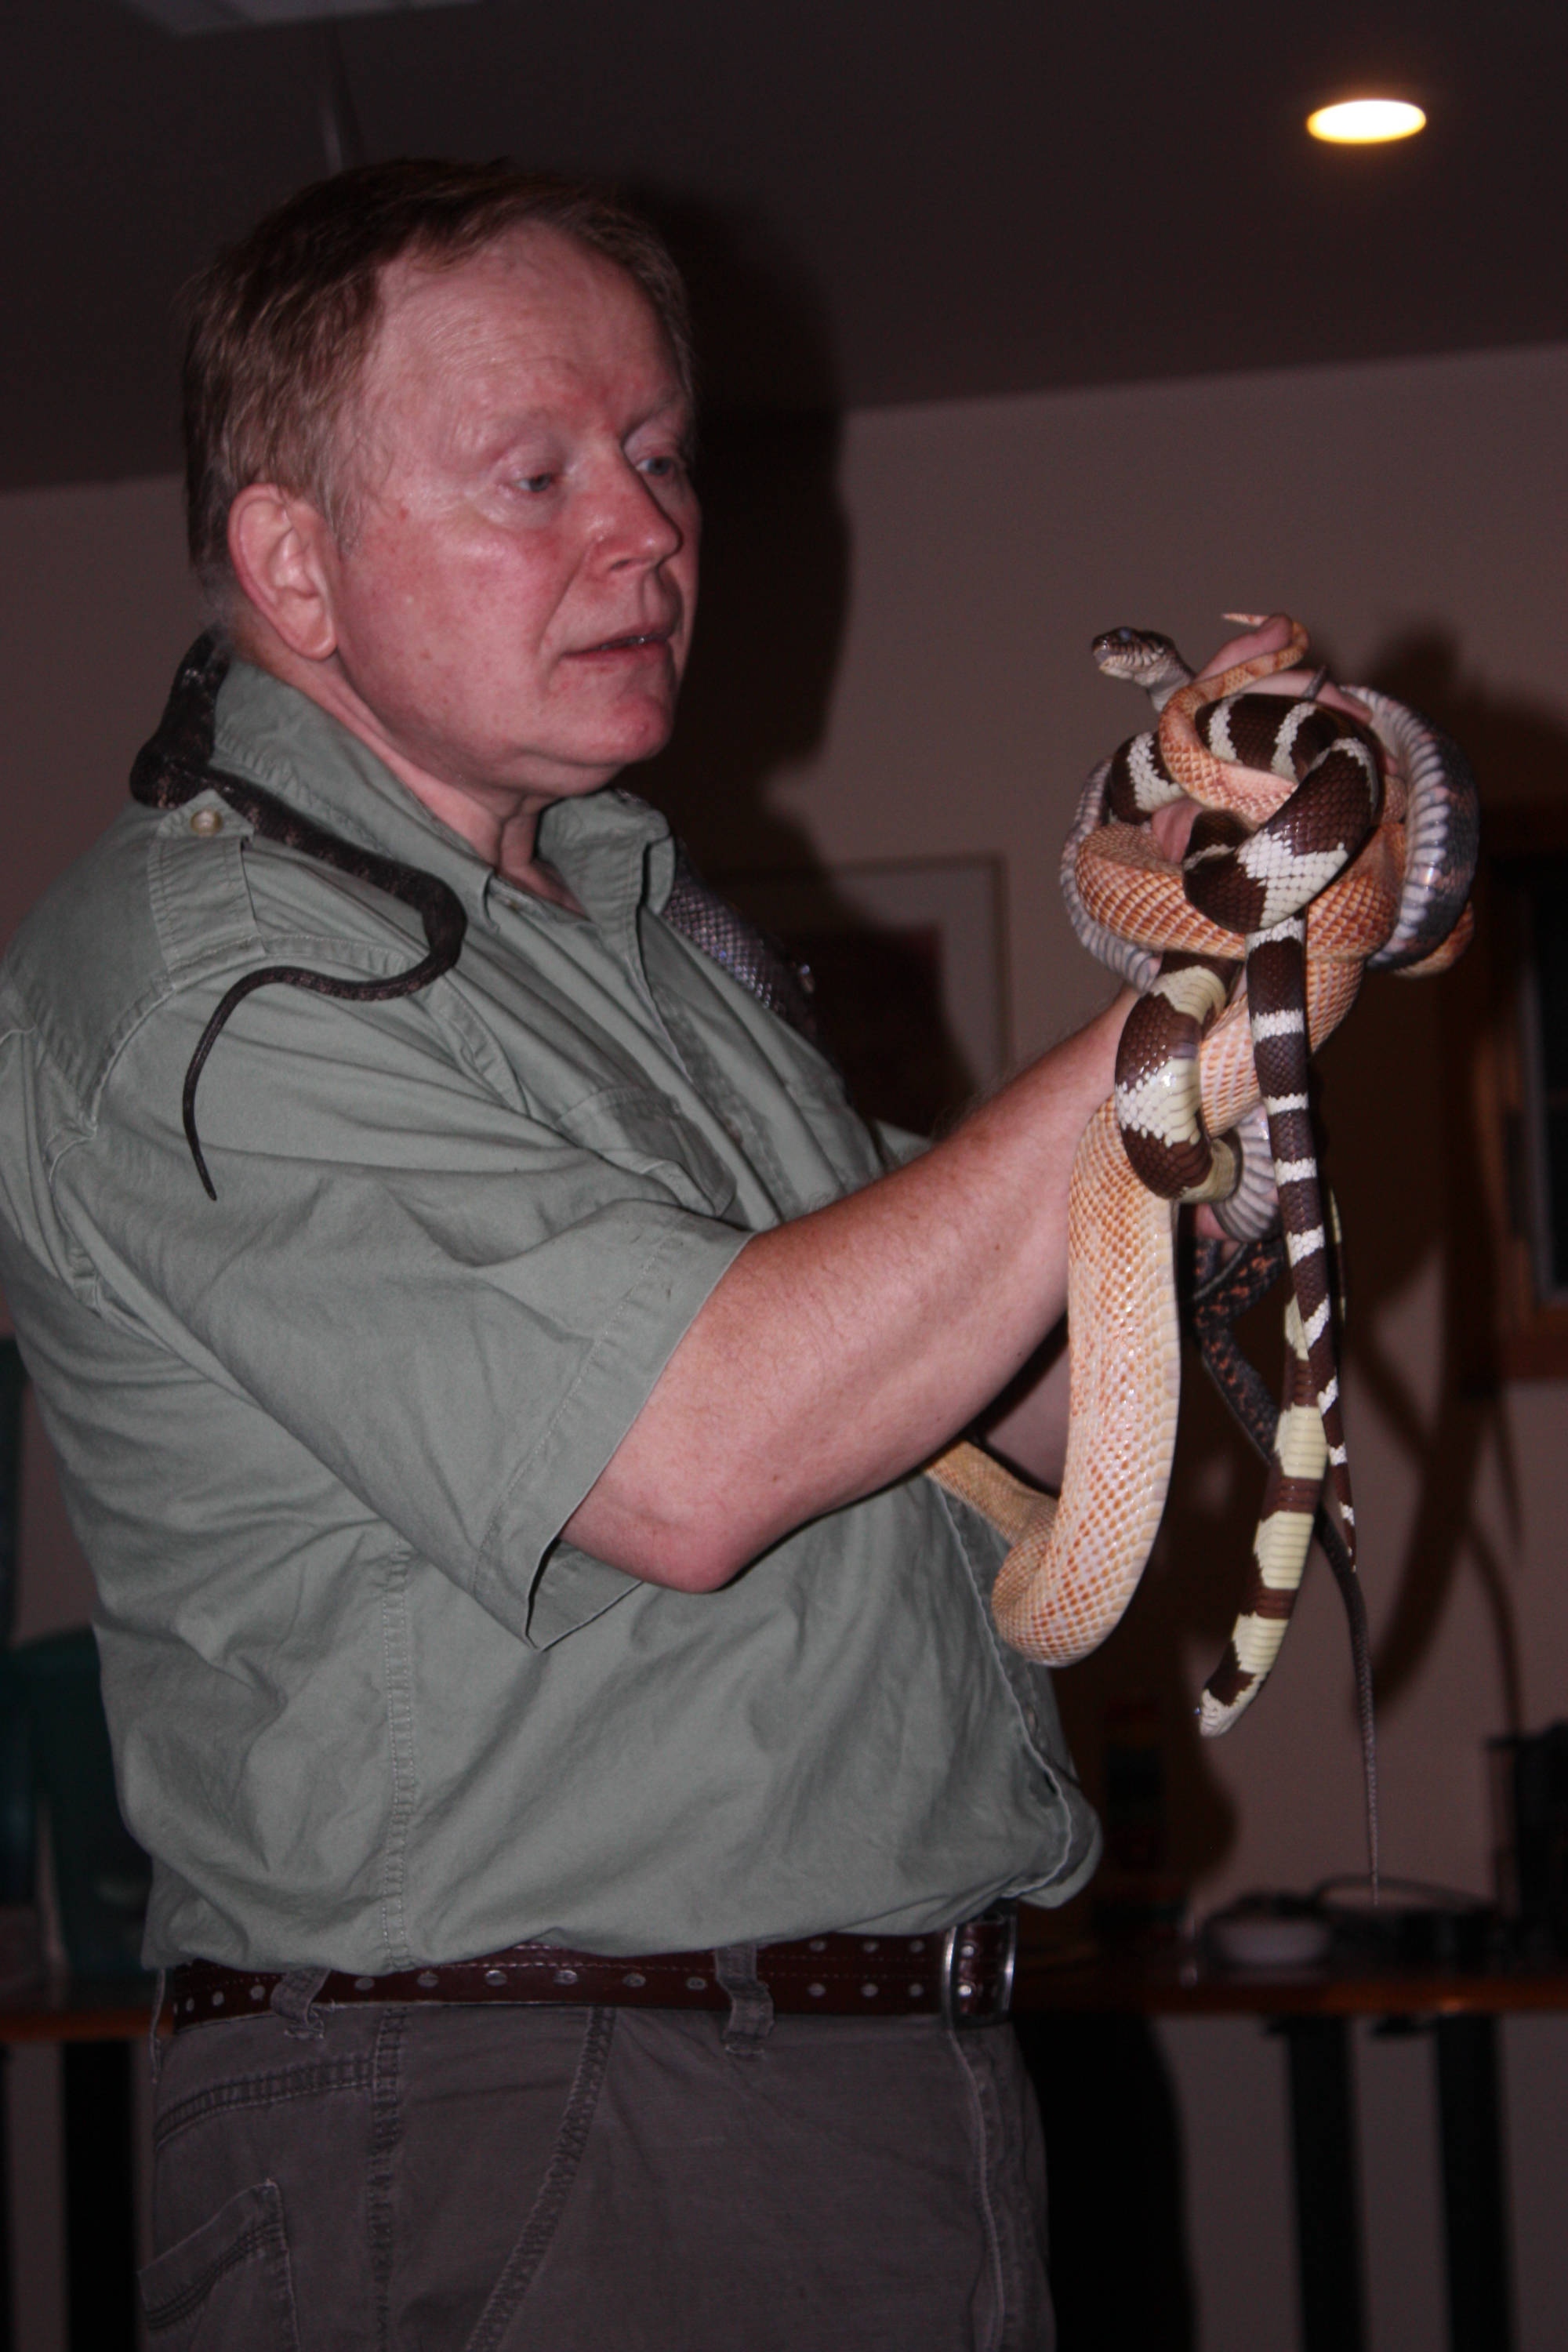 Pete from Wildlife encounters with snakes